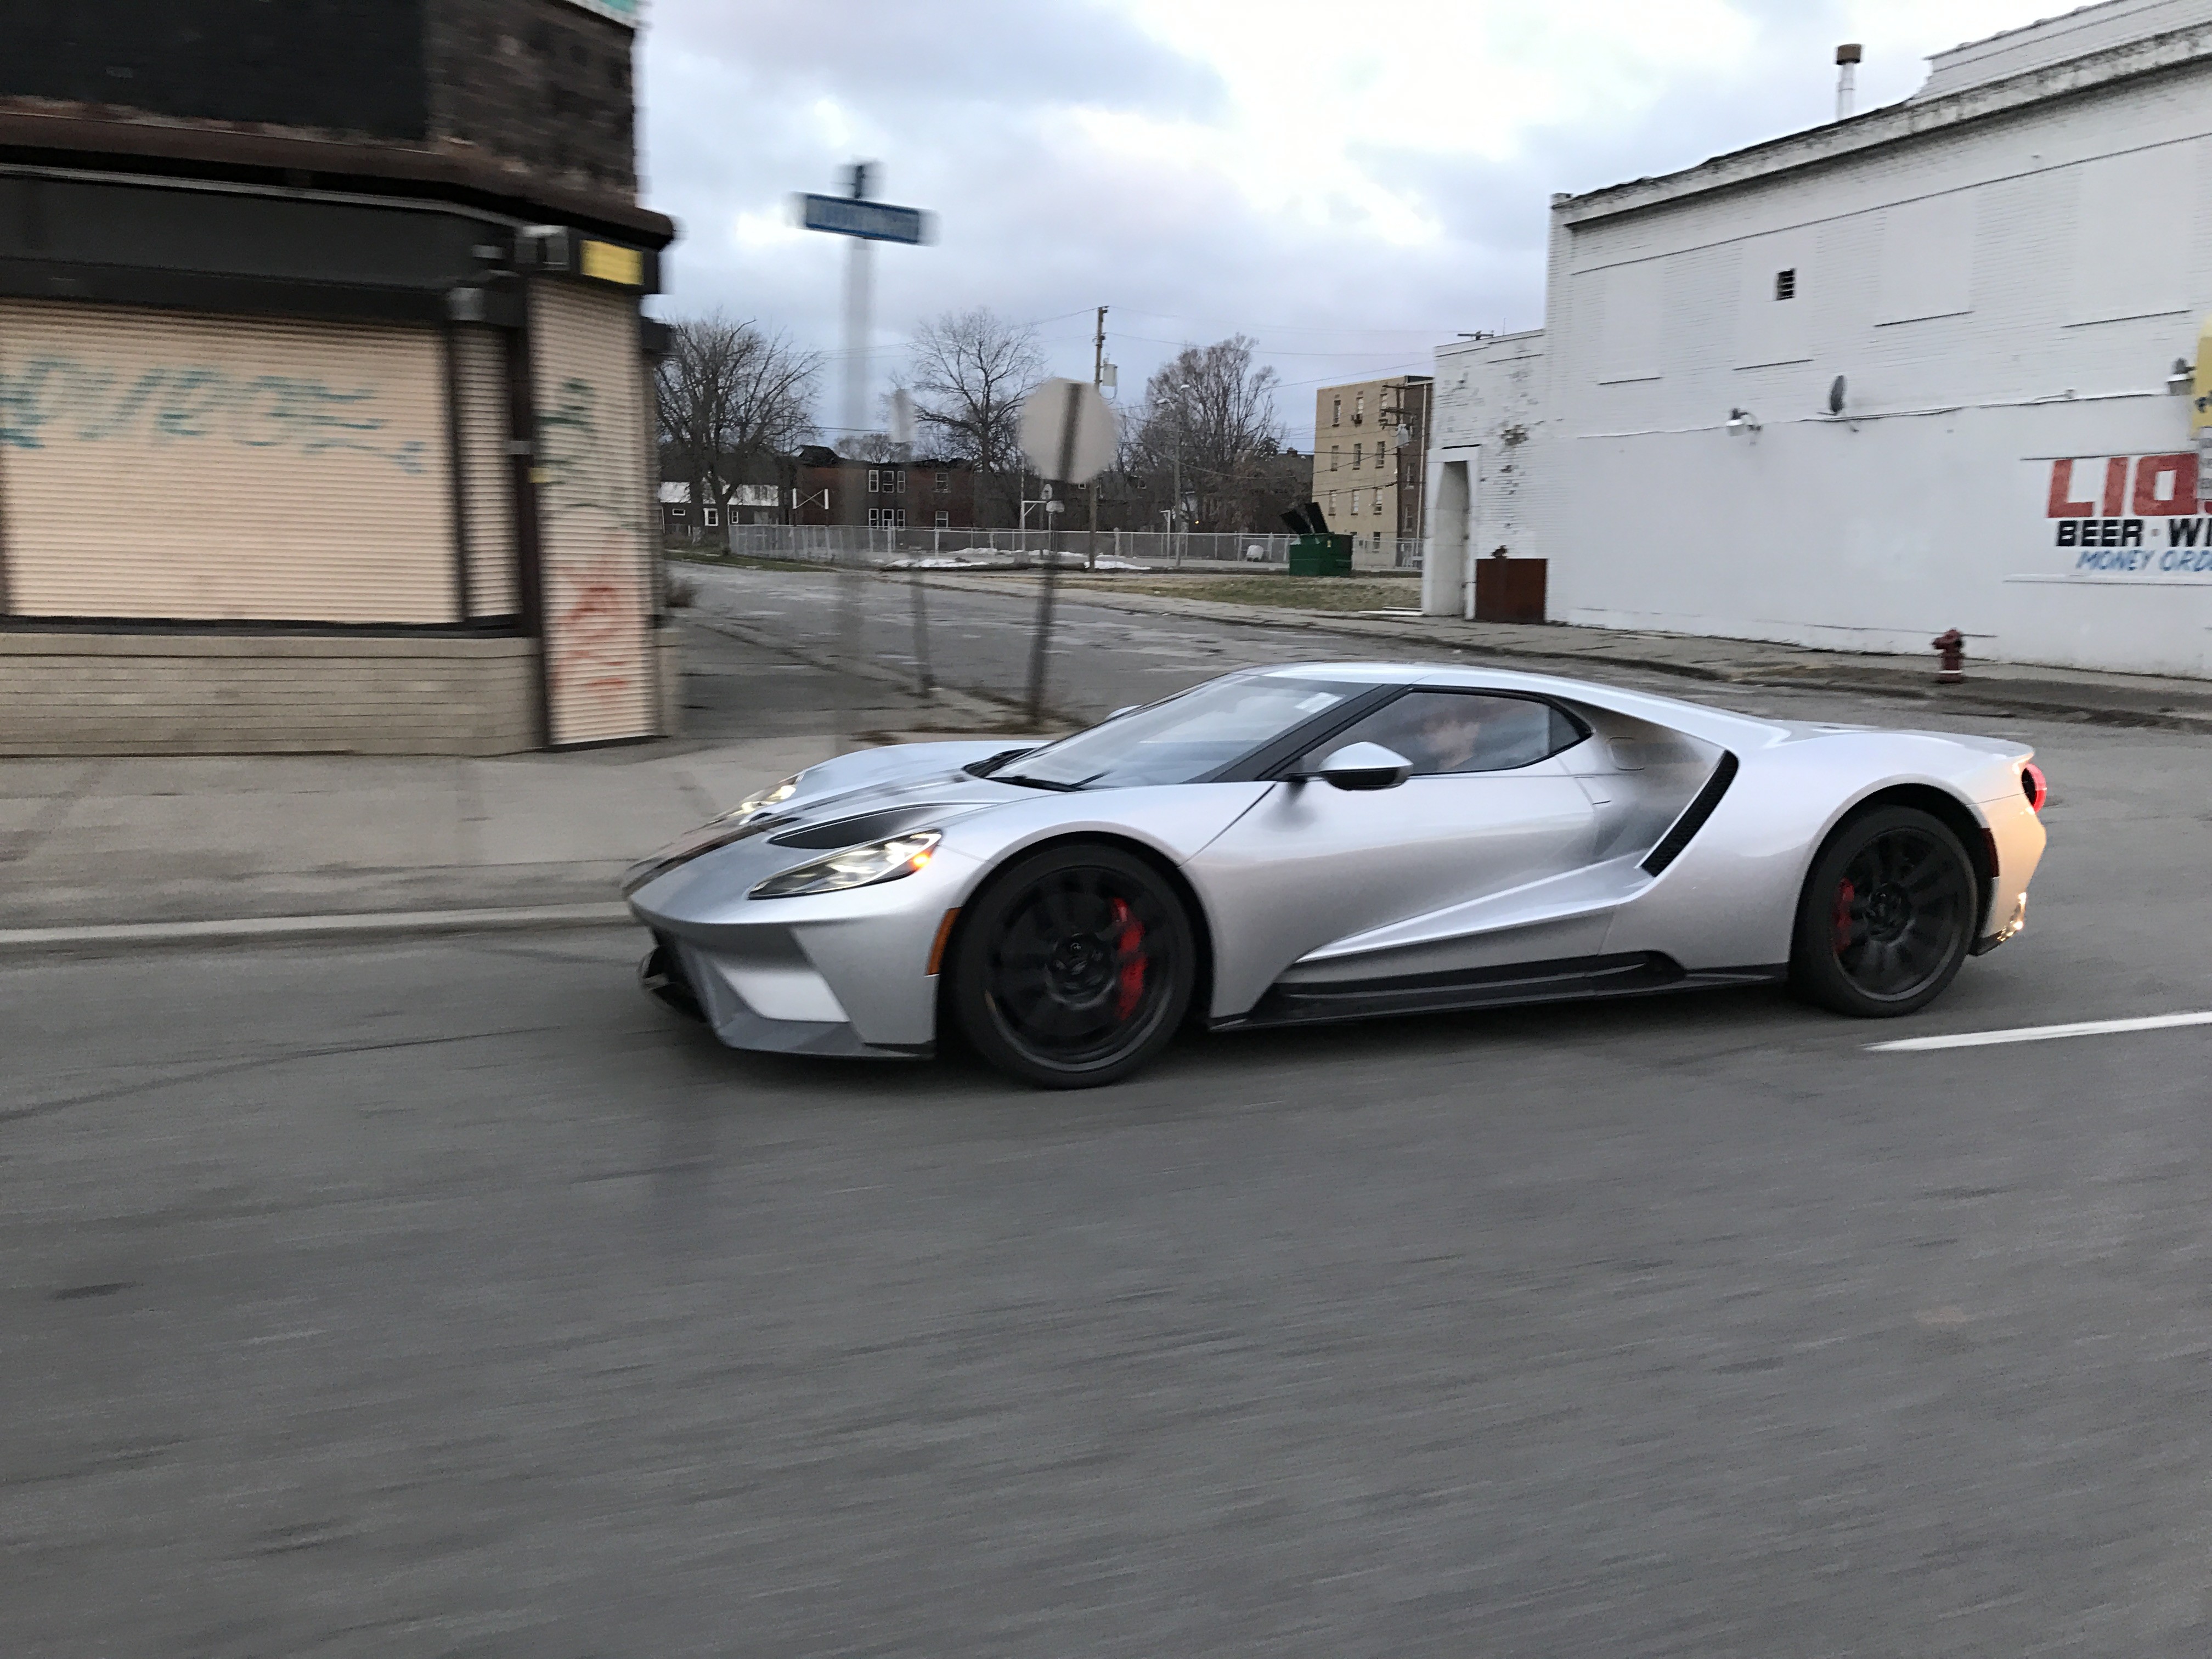 fully-naked-2017-ford-gt-roams-the-streets-of-detroit-sounds-like-a-hypercar_1.jpg